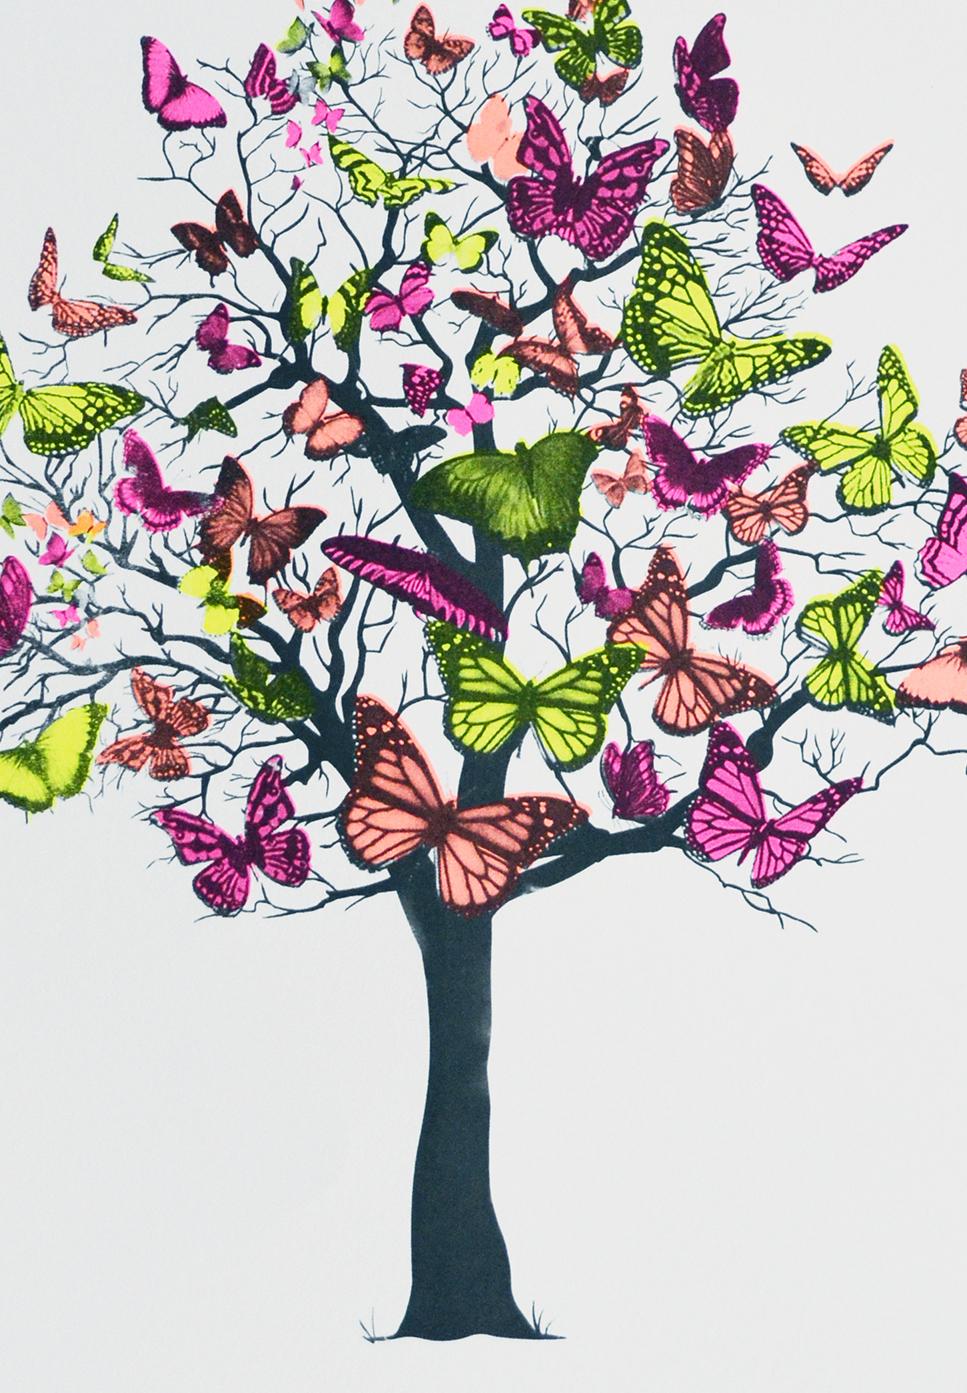 Butterfly blossom by Anne Storno
Limited edition print and hand signed by the artist 
Screenprint on paper 
Images Size: H:52 cm x W:40 cm
Complete size of unframed work: H:52cm x L:40cm x D:0.1cm
Sold unframed 
Please note that the insitu images